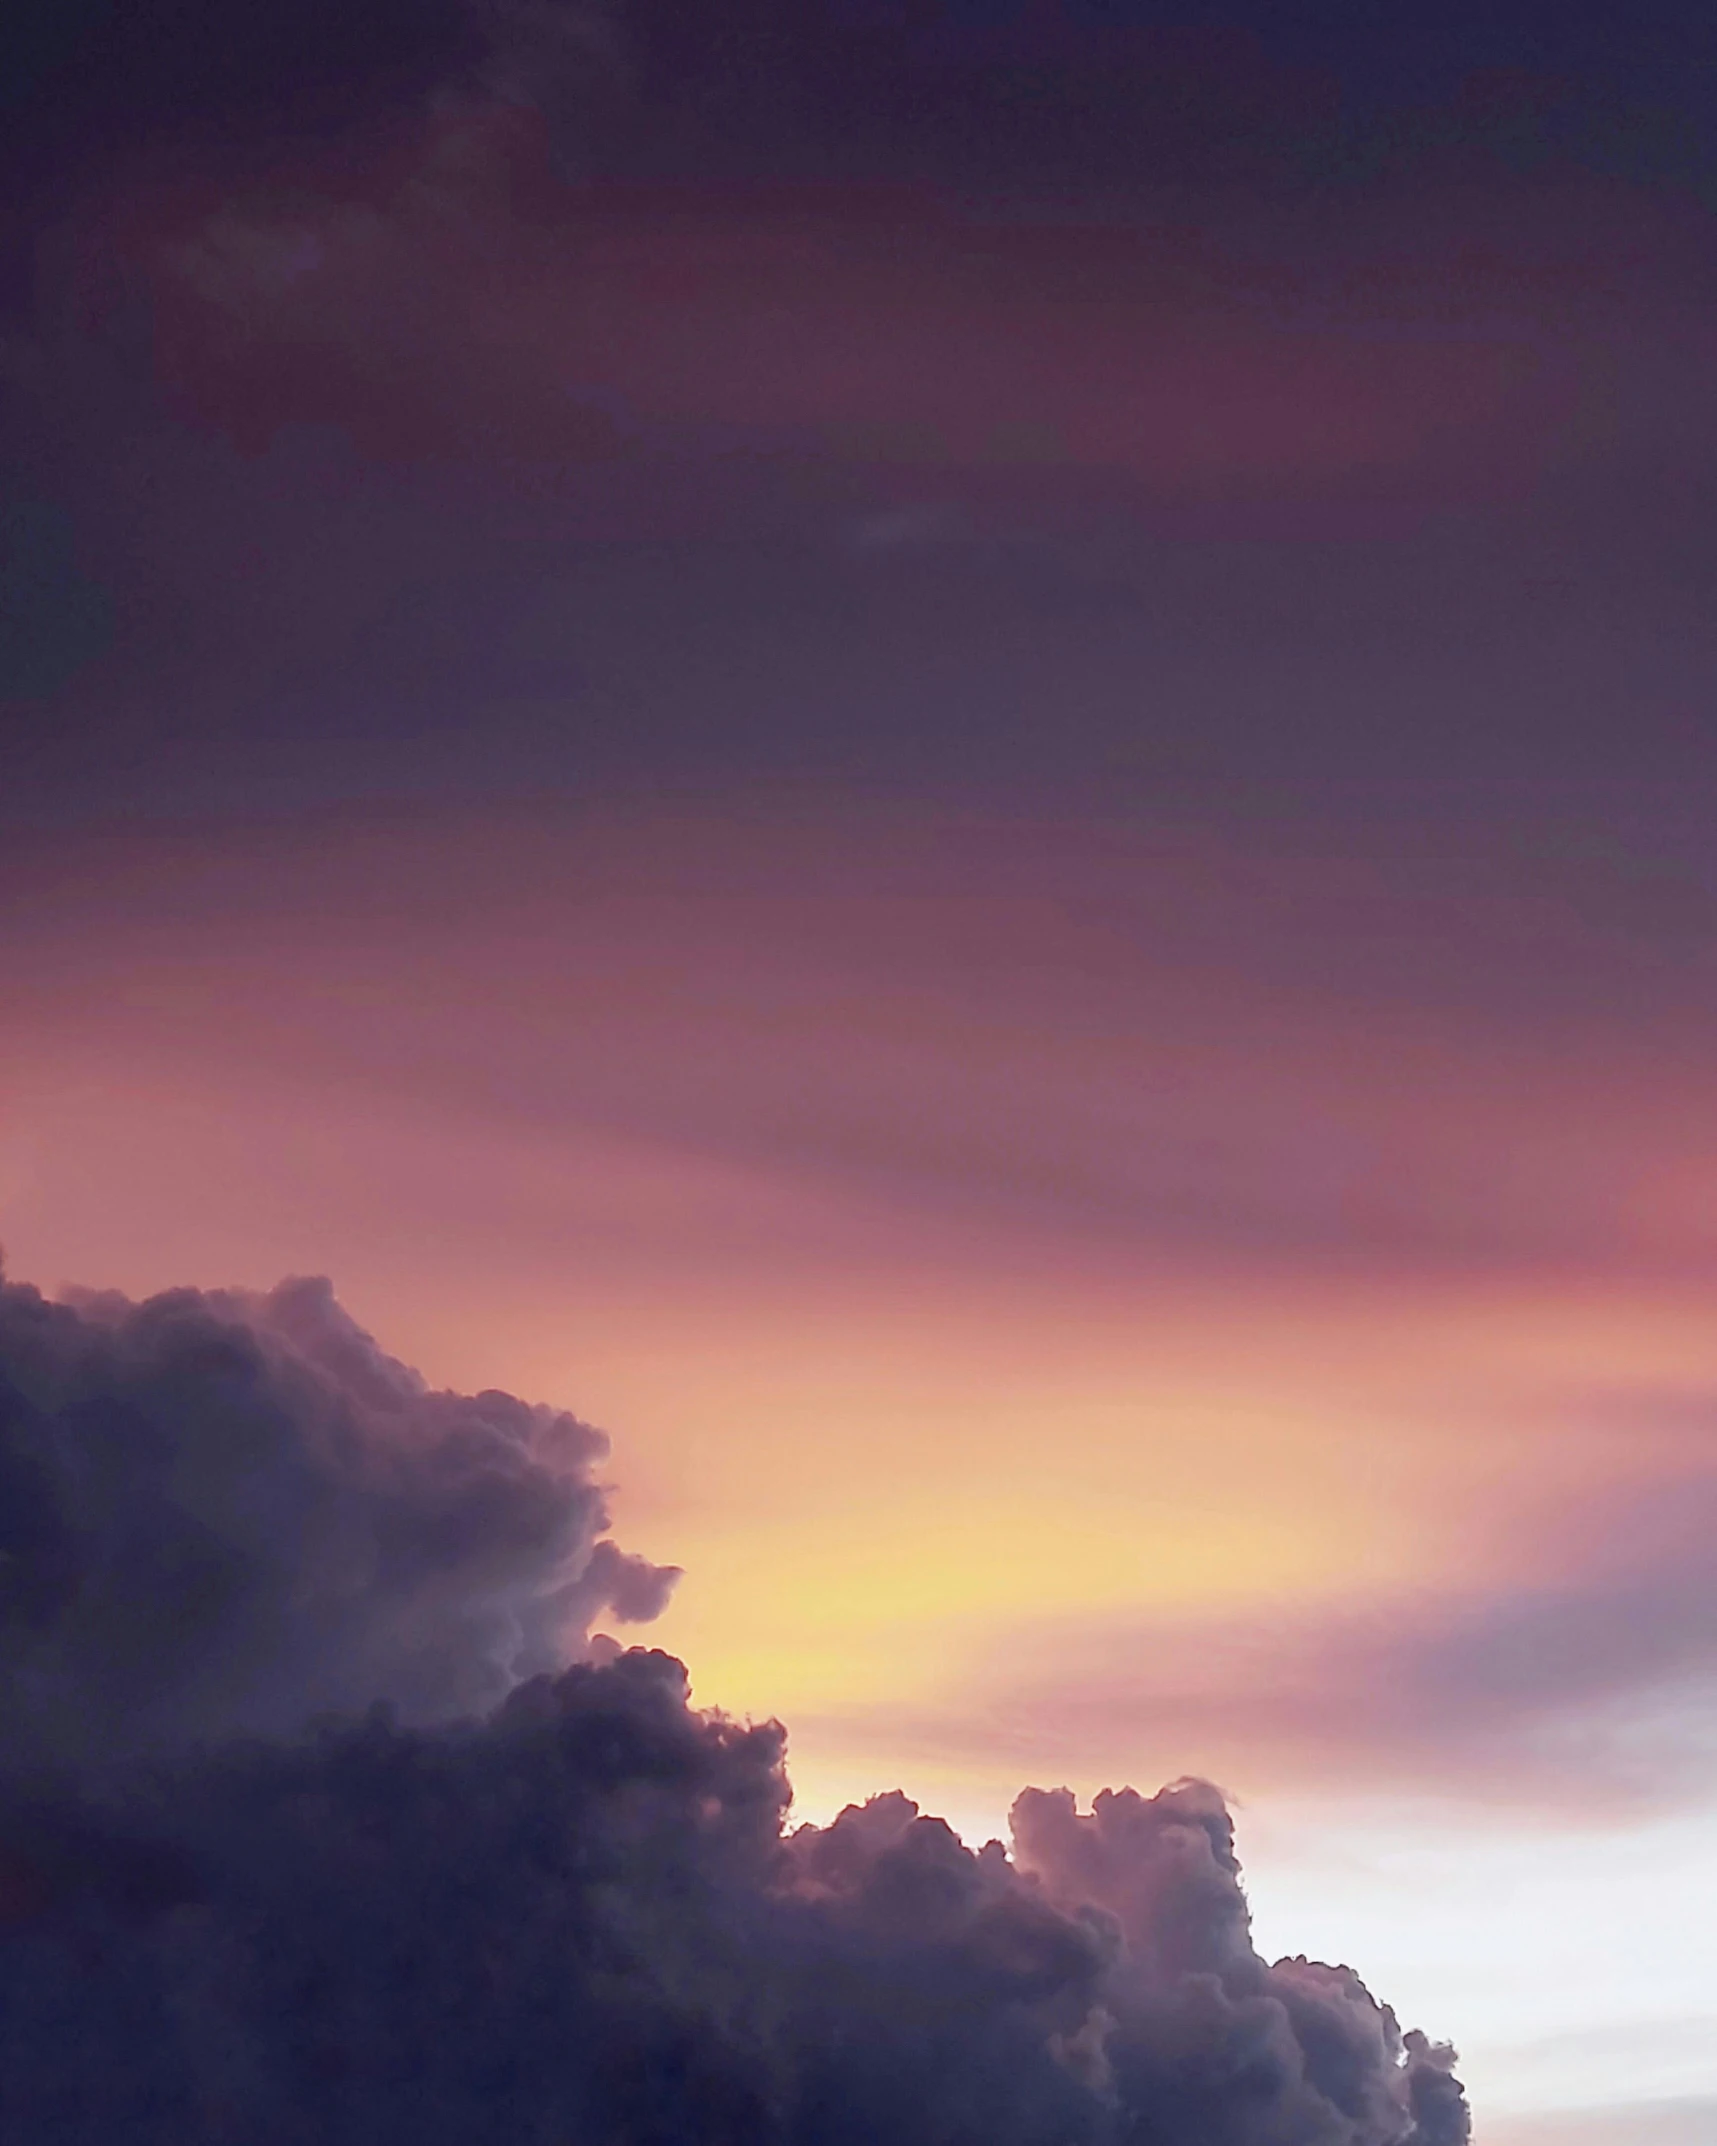 a plane flying through a cloudy sky at sunset, an album cover, unsplash, romanticism, cloud iridescence, dark purple clouds, ((sunset)), storm in the evening